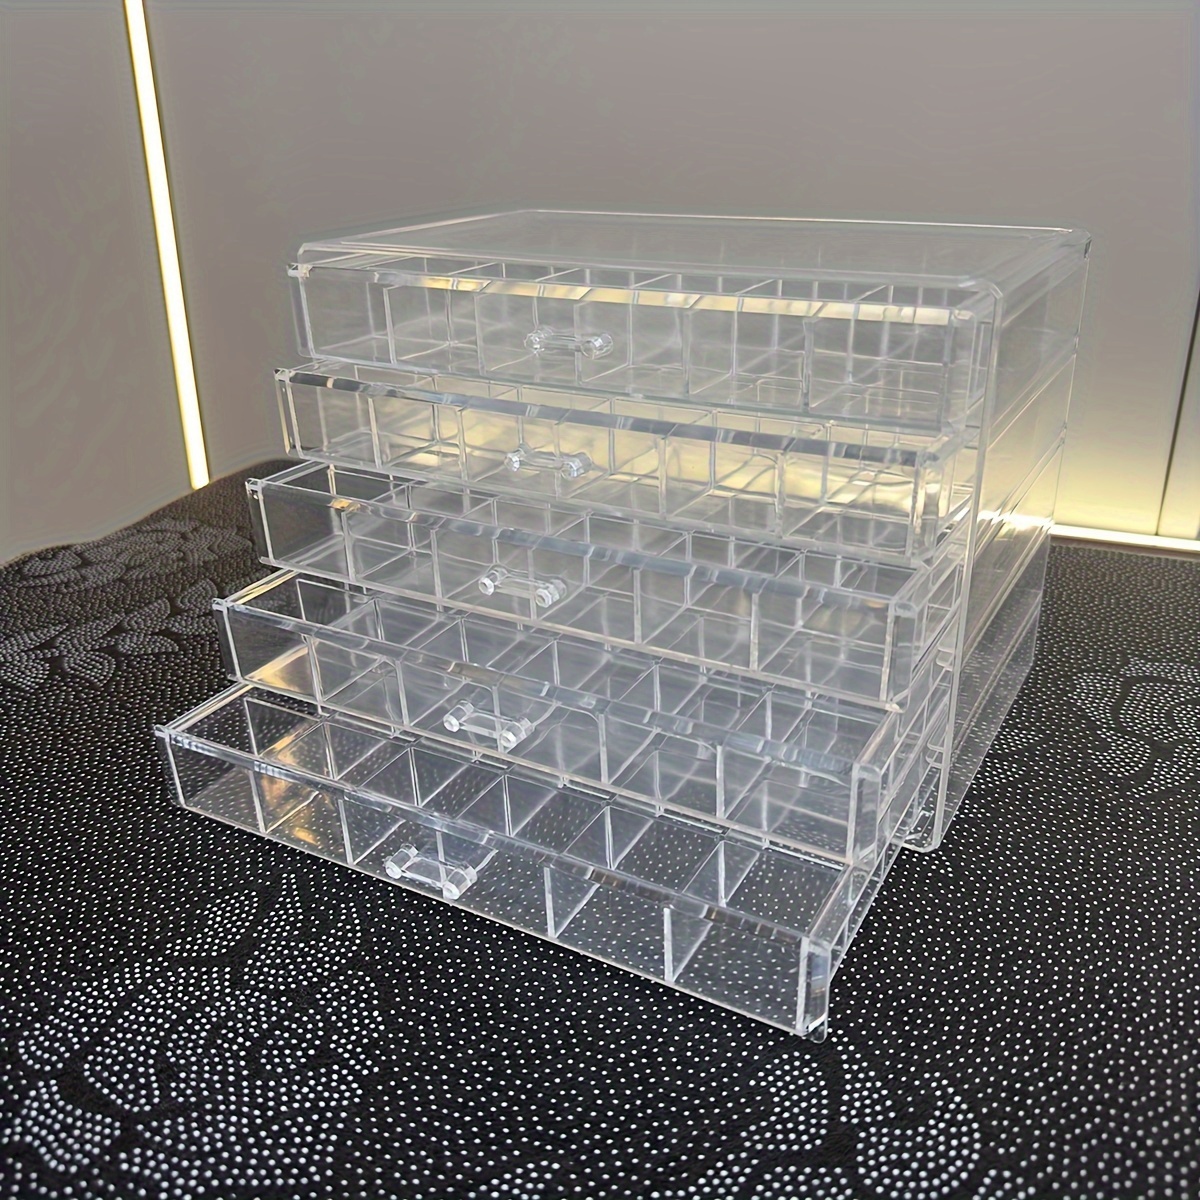 

1pc 5-layer 120-grid Large-capacity Jewelry Storage Box, Suitable For Storing Small Jewelry Like Rings, Earrings, Studs